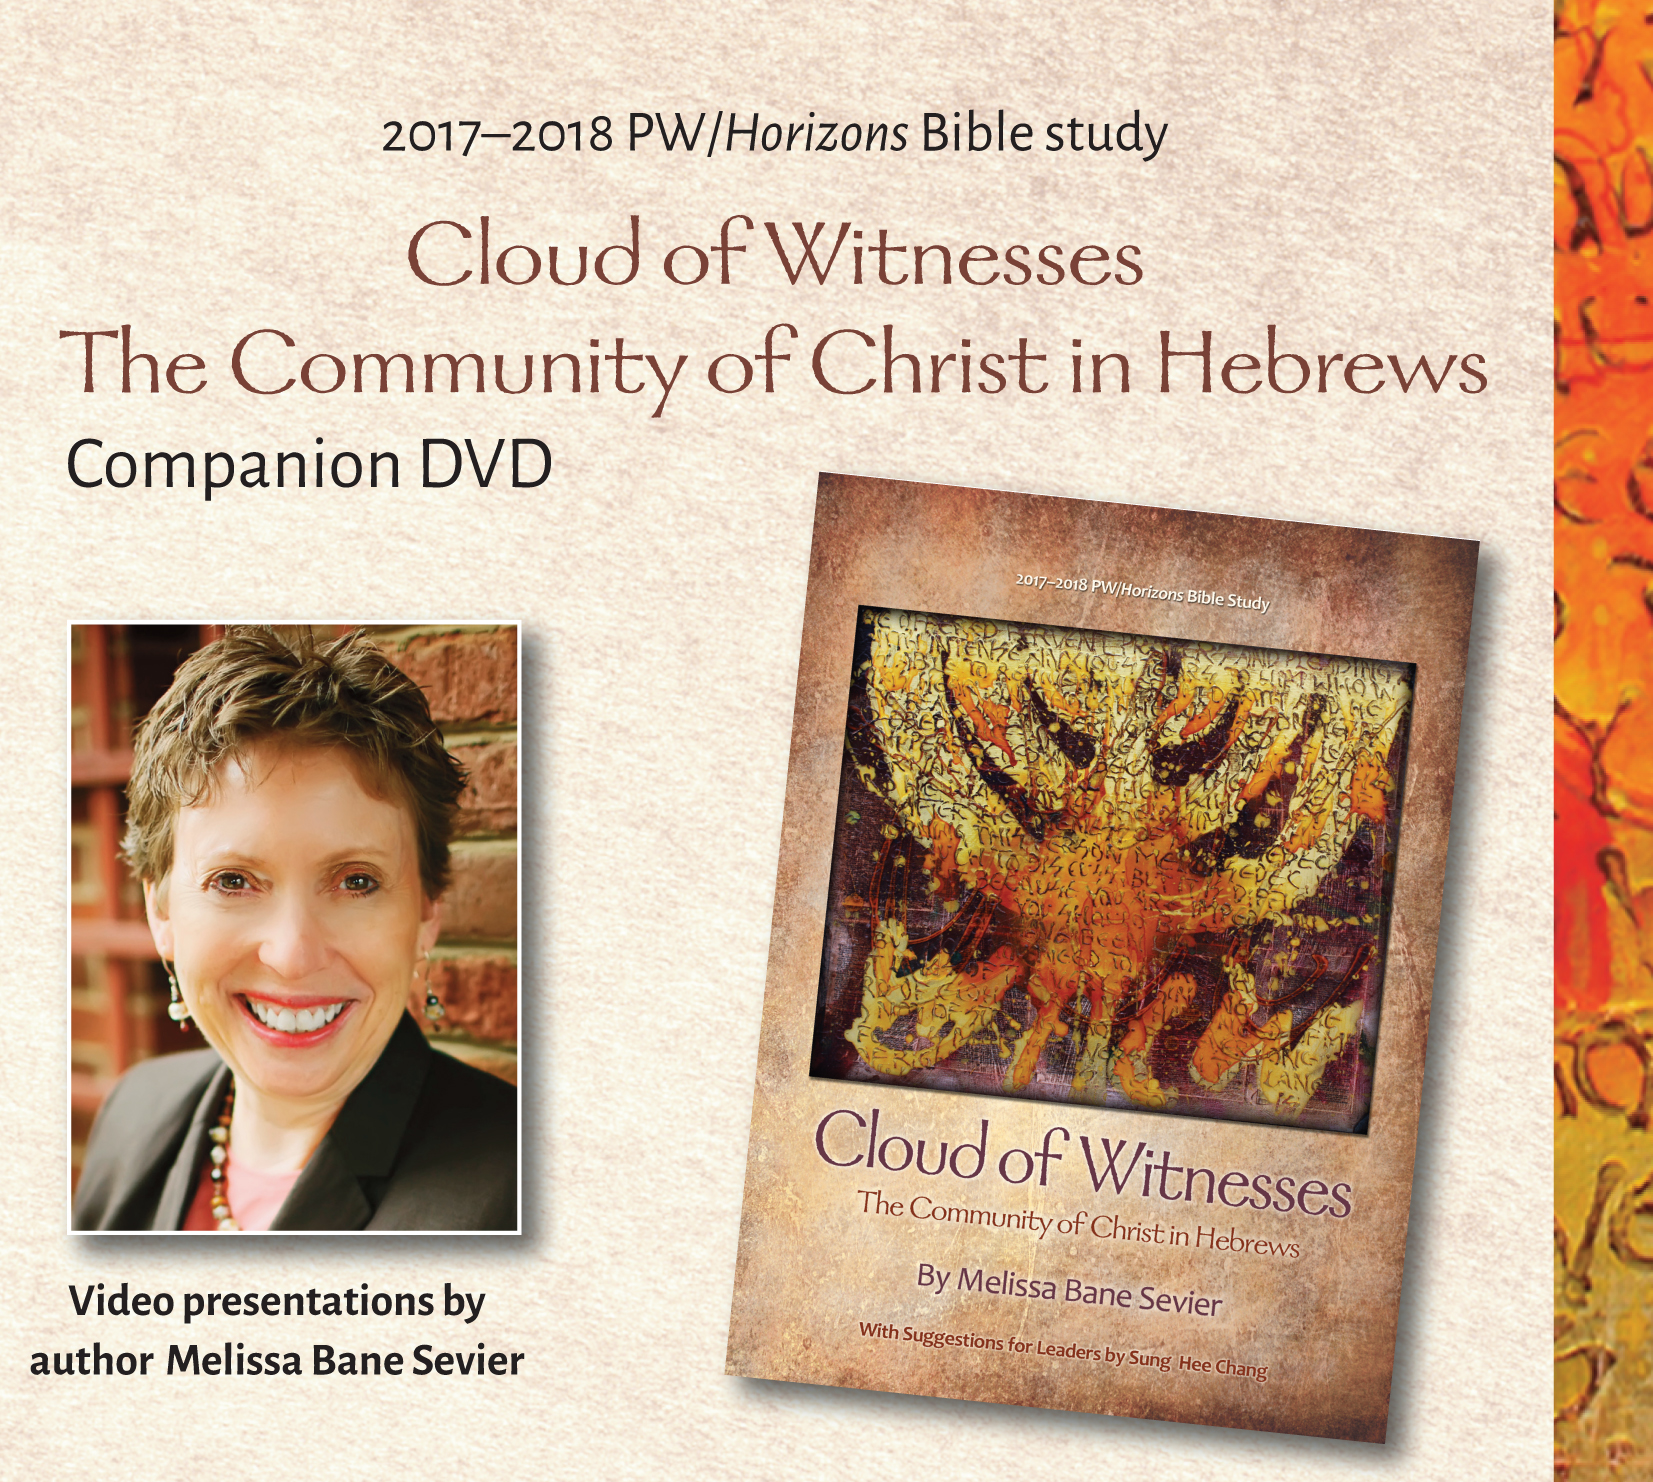 Cloud of Witnesses DVD